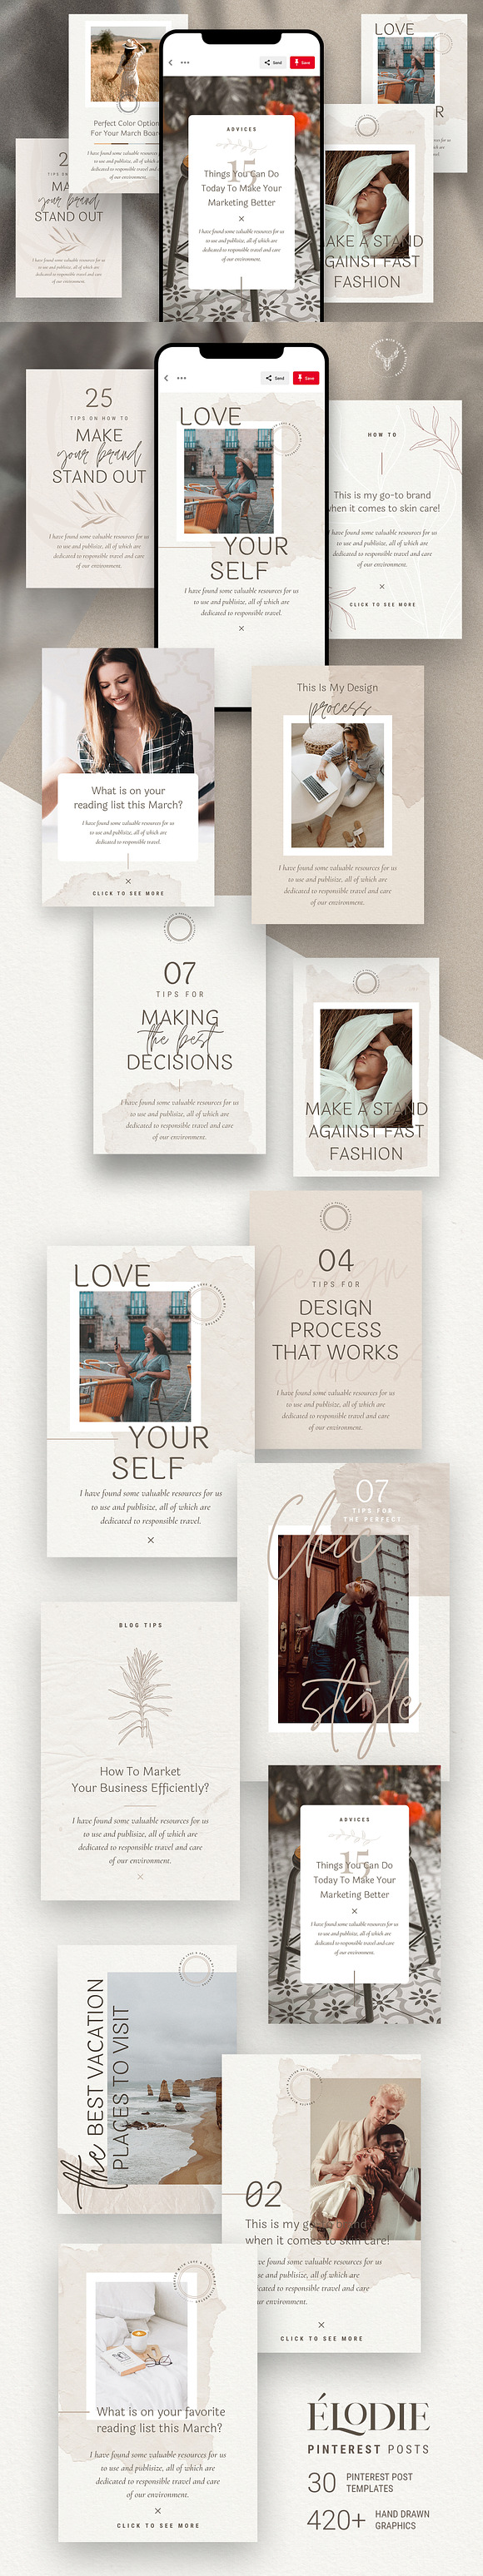 Elodie - Canva Pinterest Templates in Pinterest Templates - product preview 3